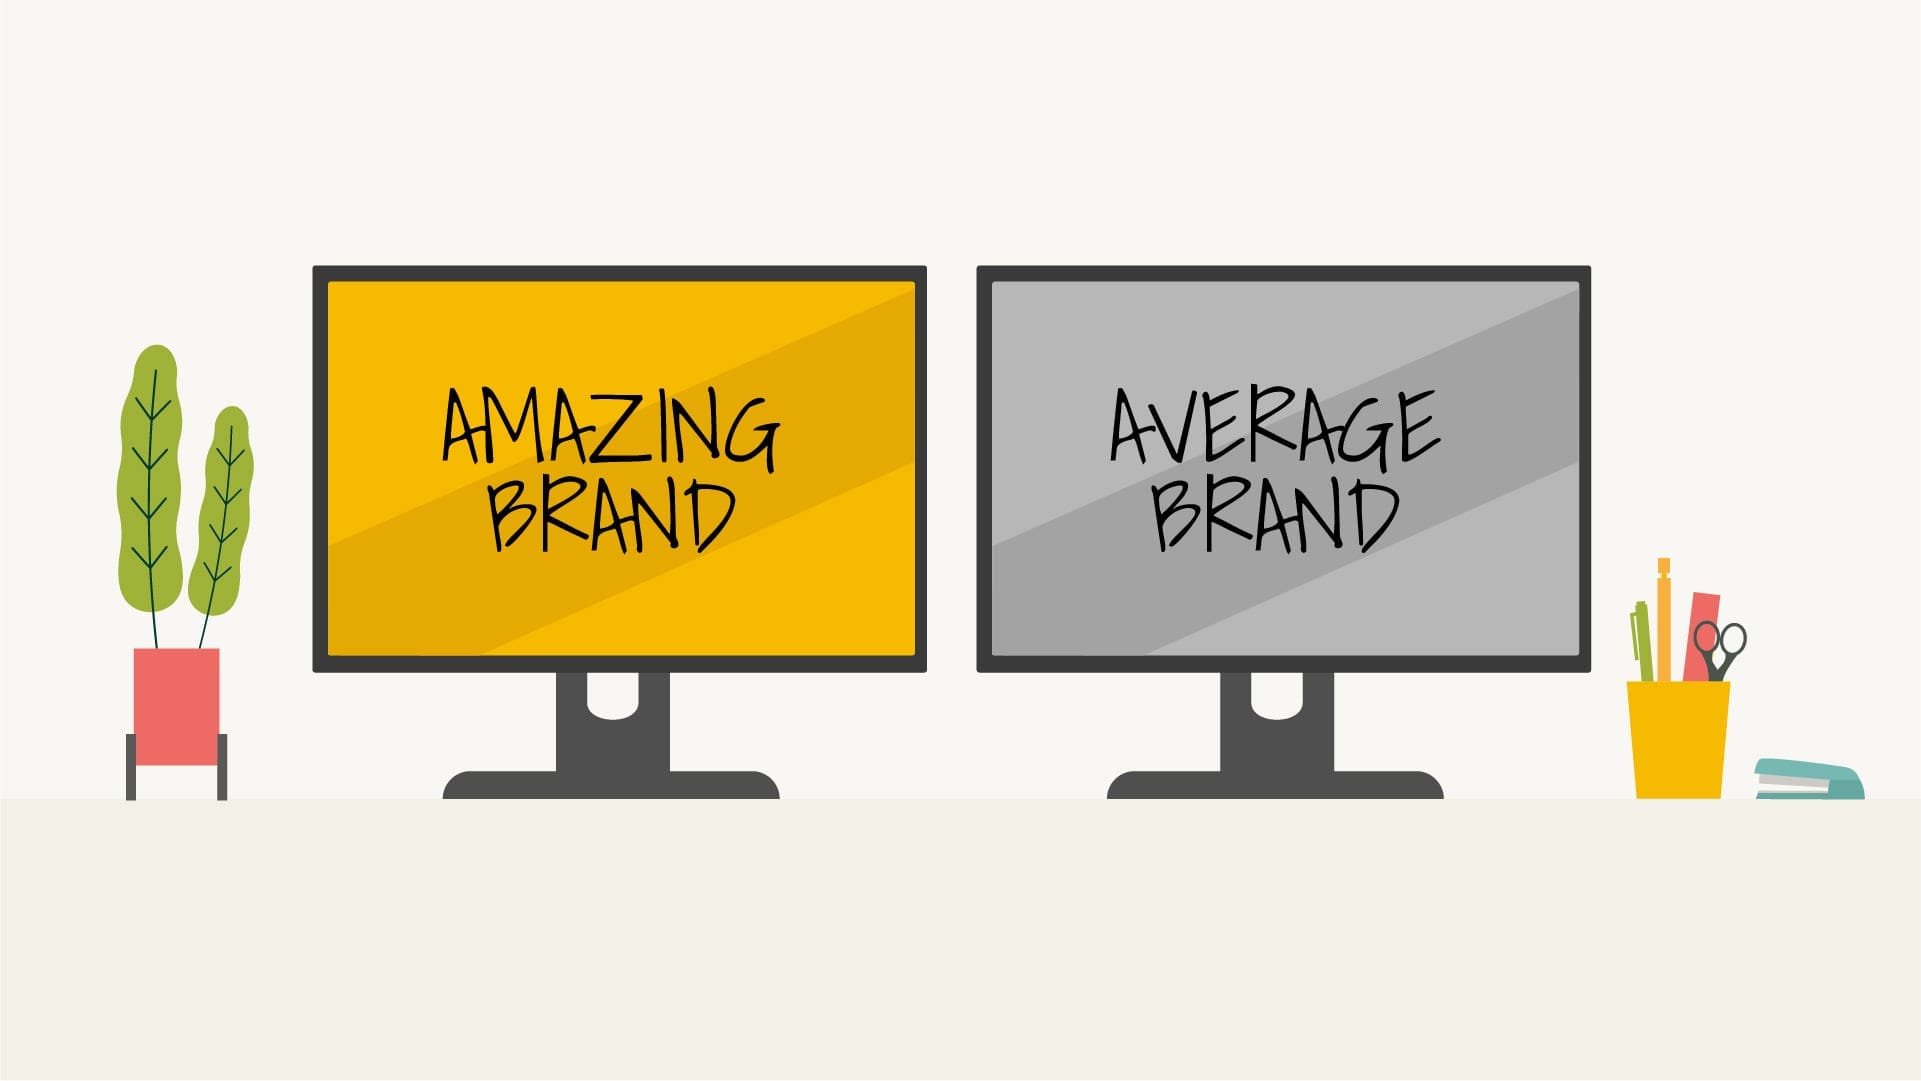 Don't Start Your New Website Until You've Got Your Brand Sorted